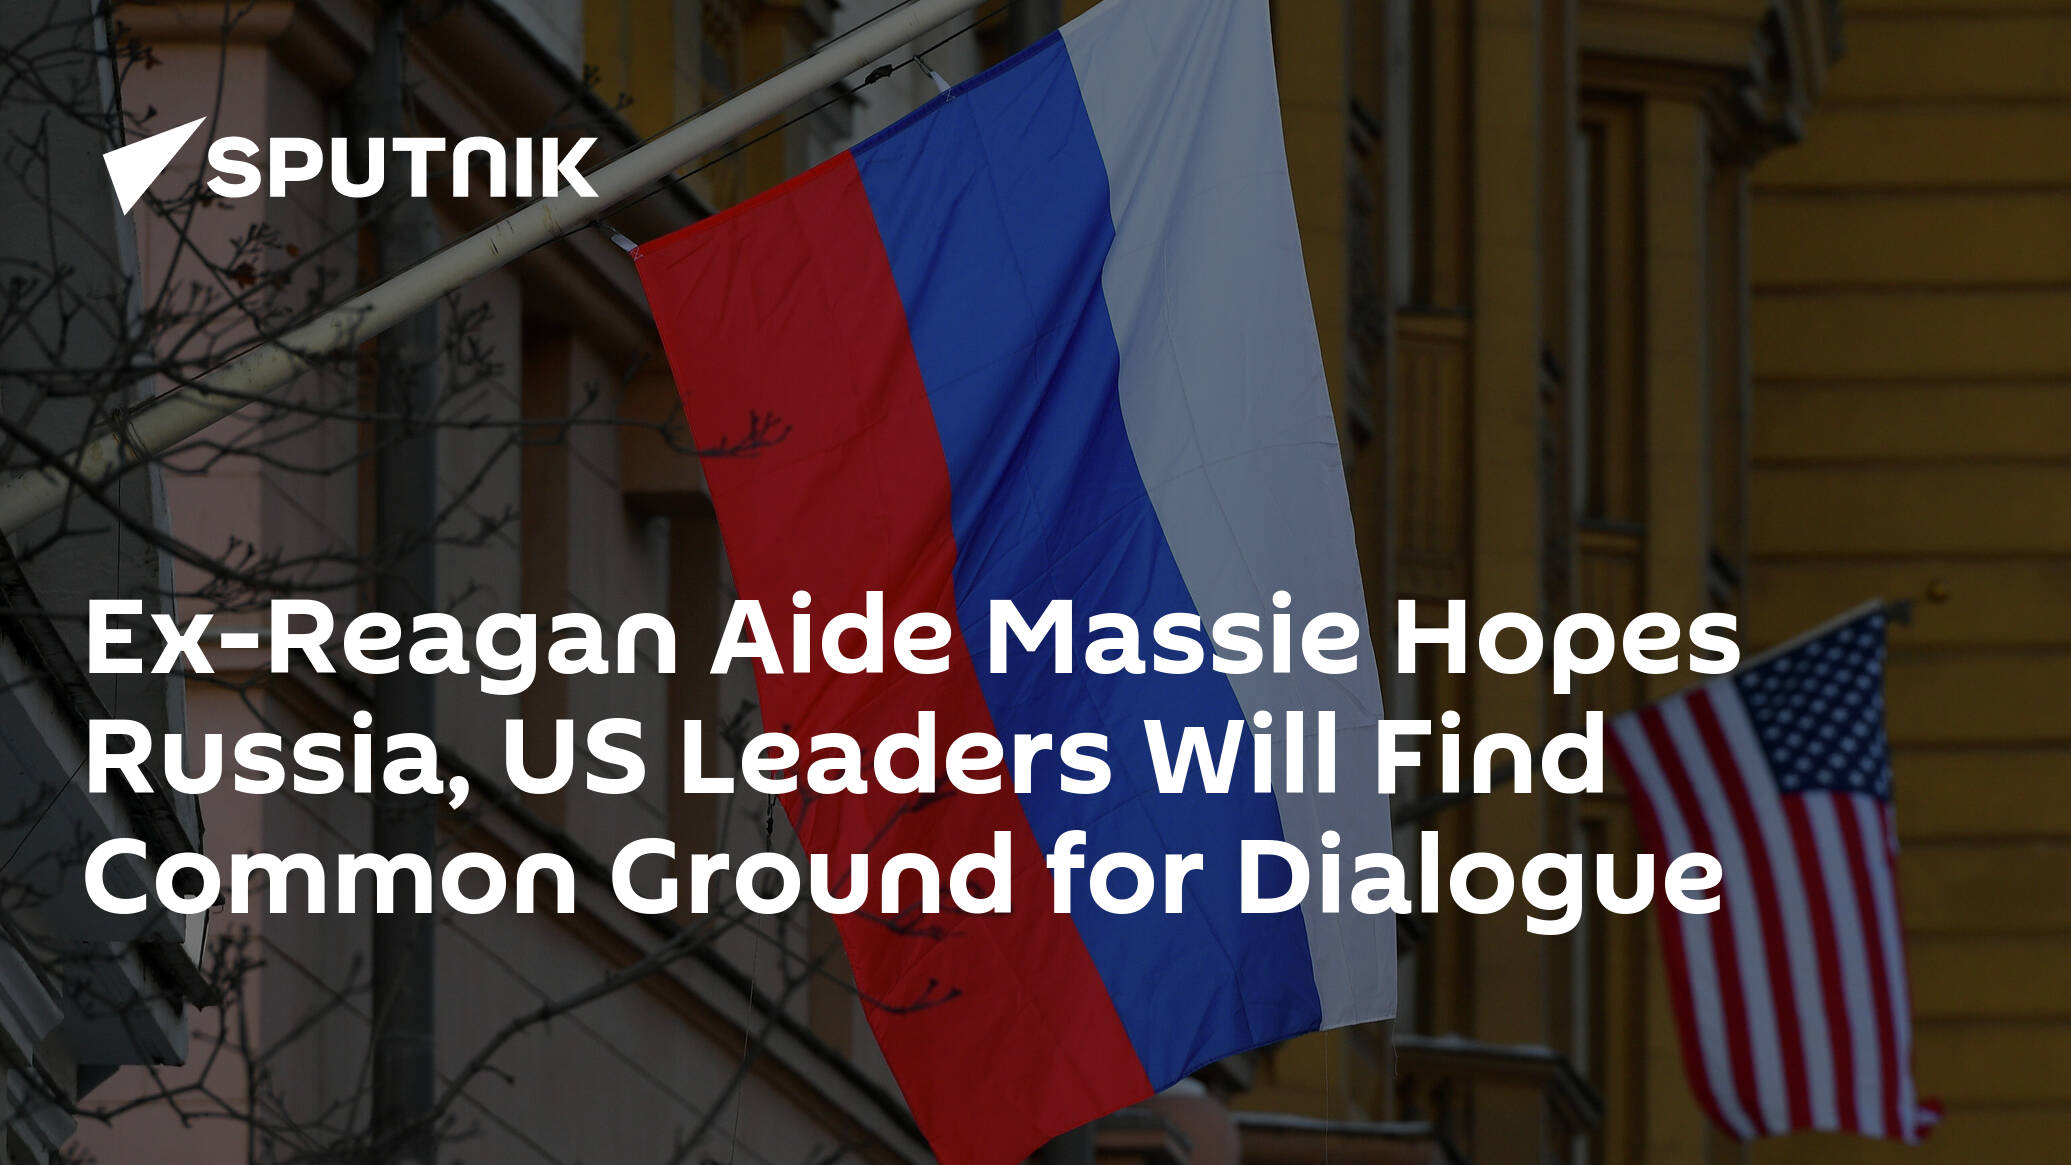 Ex-Reagan Aide Massie Hopes Russia, US Leaders Will Find Common Ground for Dialogue